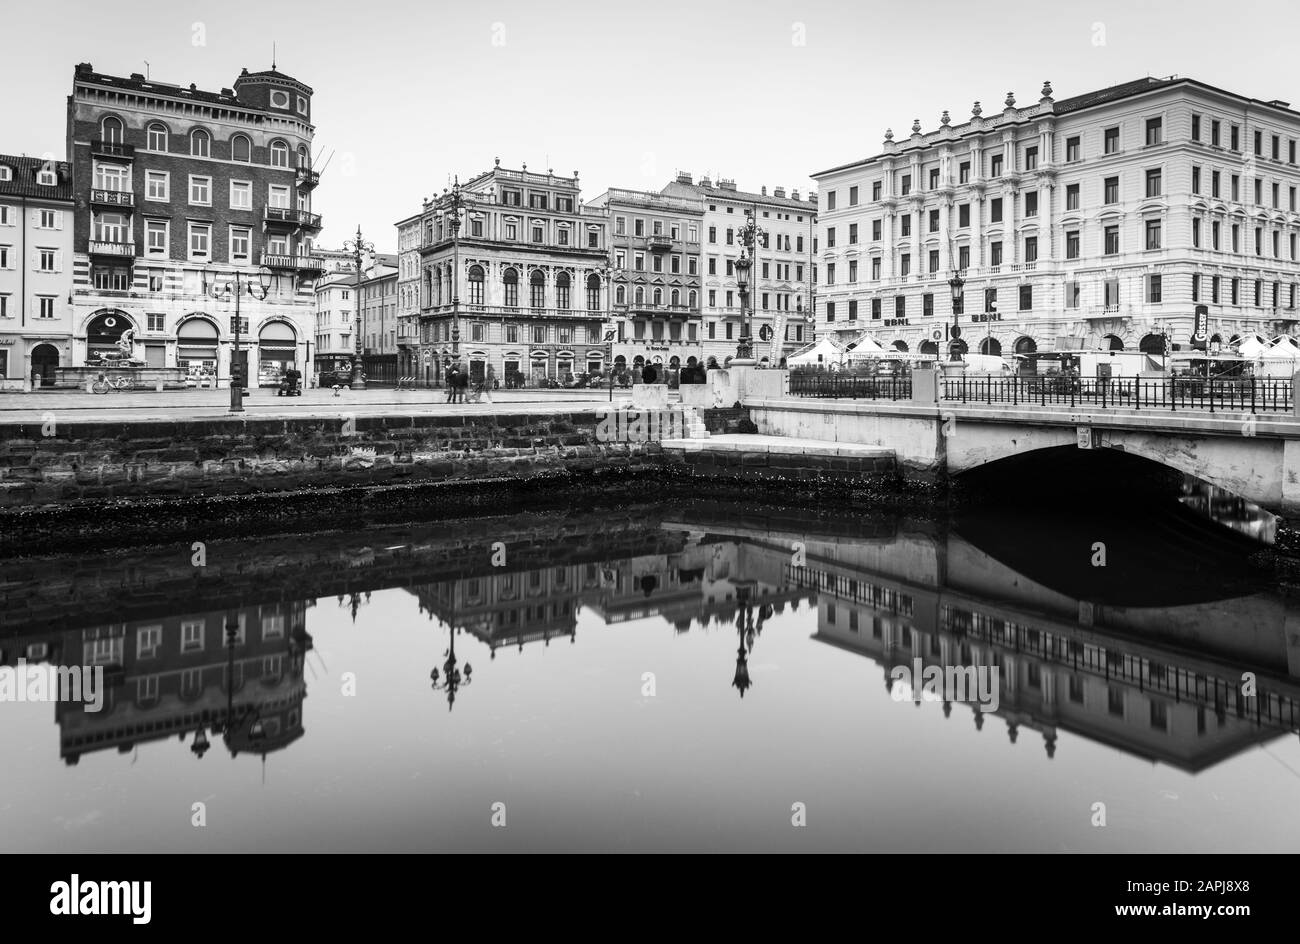 Trieste - December 2016, Italy: Old historical buildings mirror reflected in water, Grand Canal in Trieste city center, black and white cityscape Stock Photo